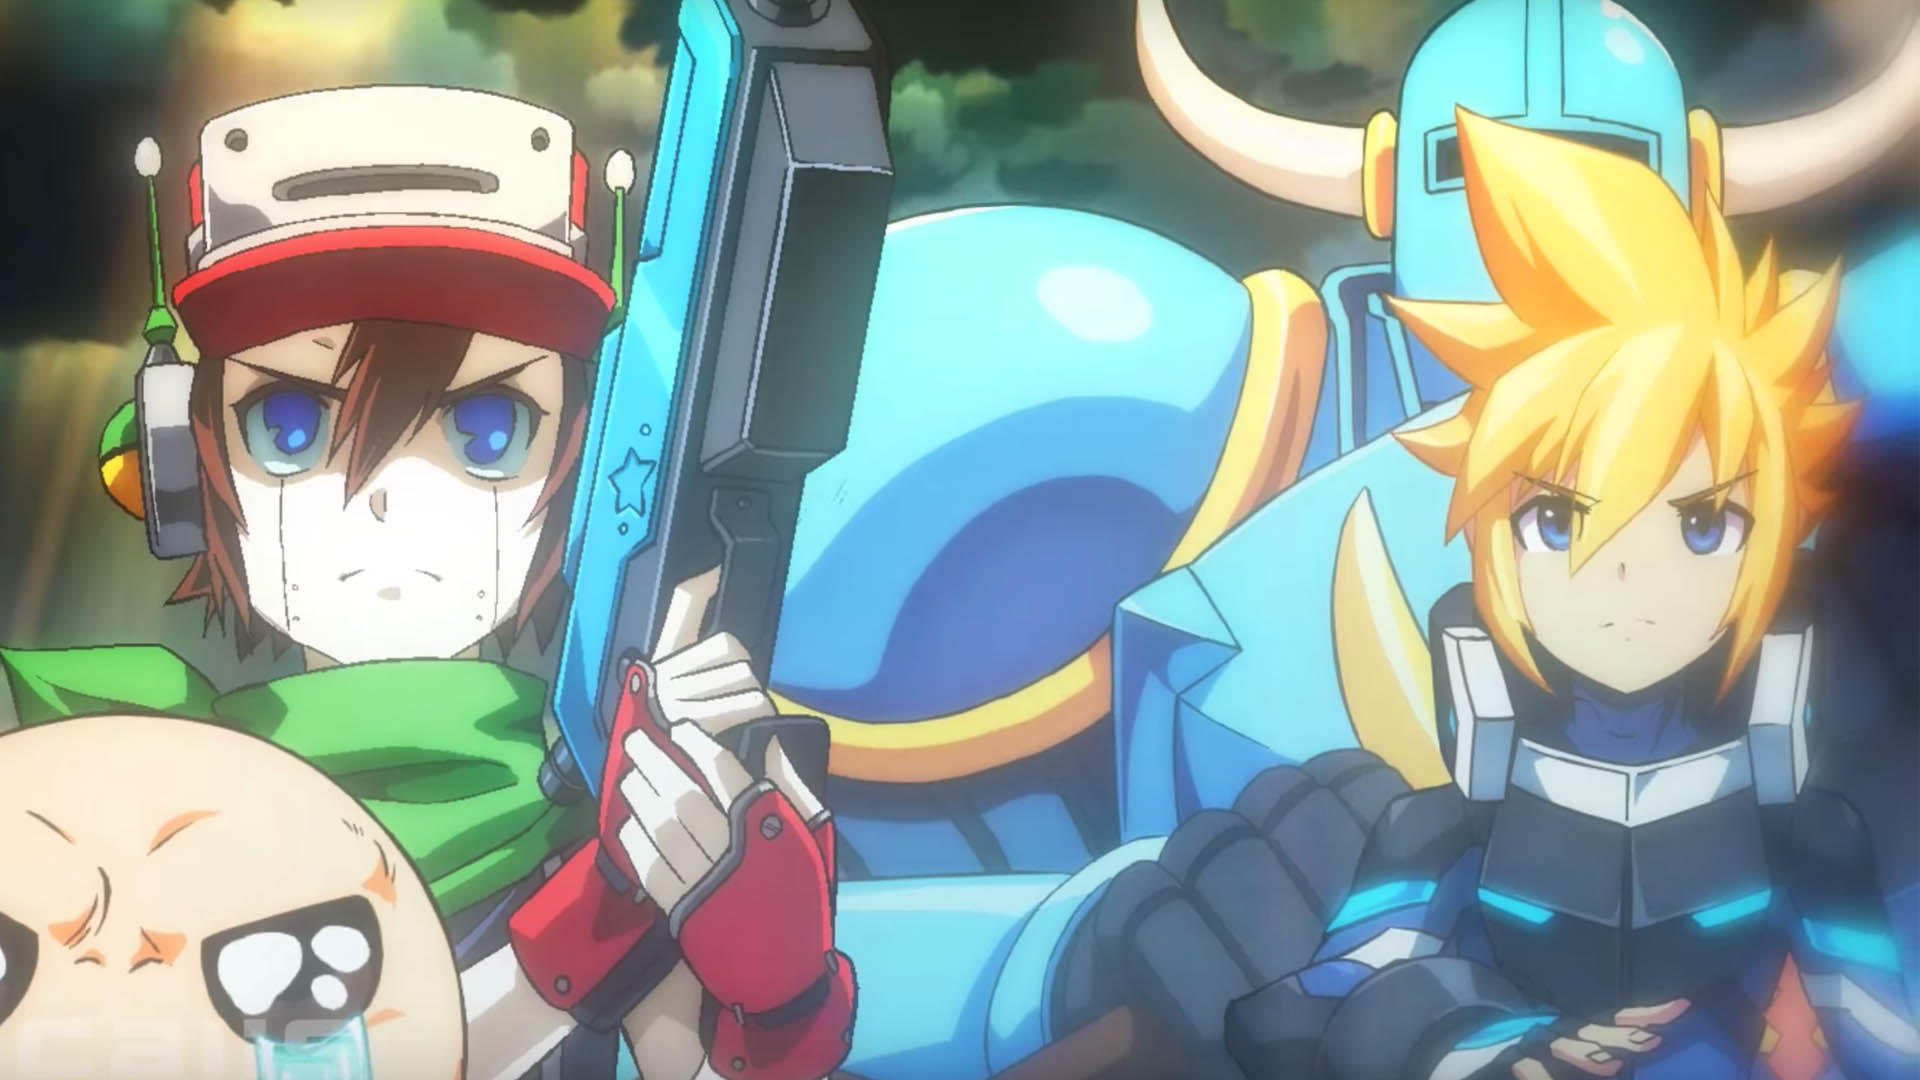 See Quote, Gunvolt, Isaac, and Shovel Knight in Blade Strangers' extended intro ...1920 x 1080